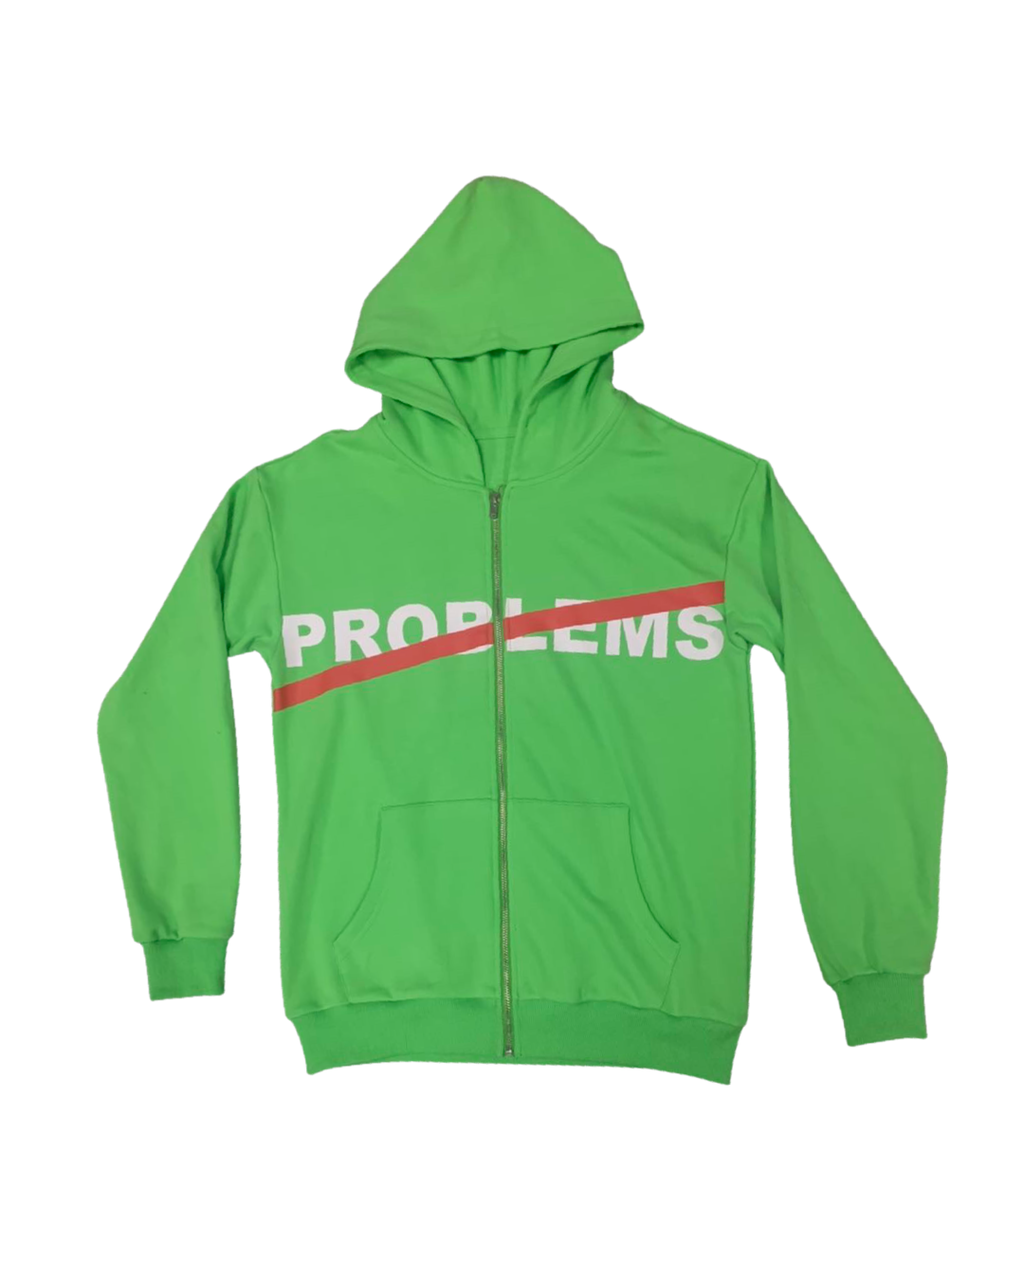 Slime Green “Problems Do Not Exist” Zip Up Jacket (BEGINNING OF FALL SALE!)